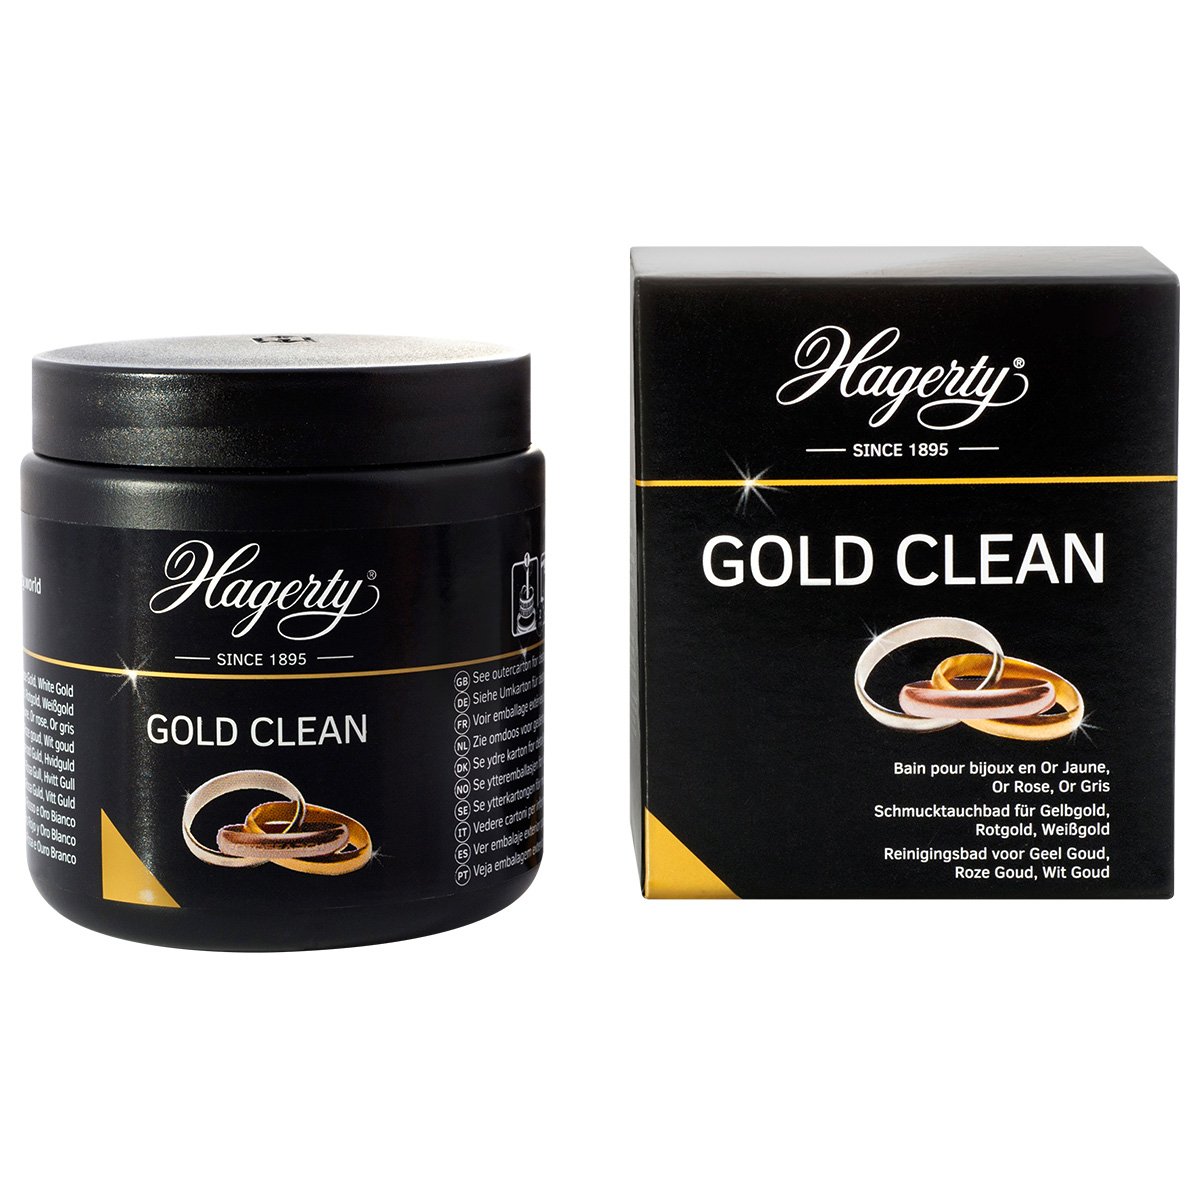 Hagerty Gold Clean, dompelbad voor goud, 170 ml